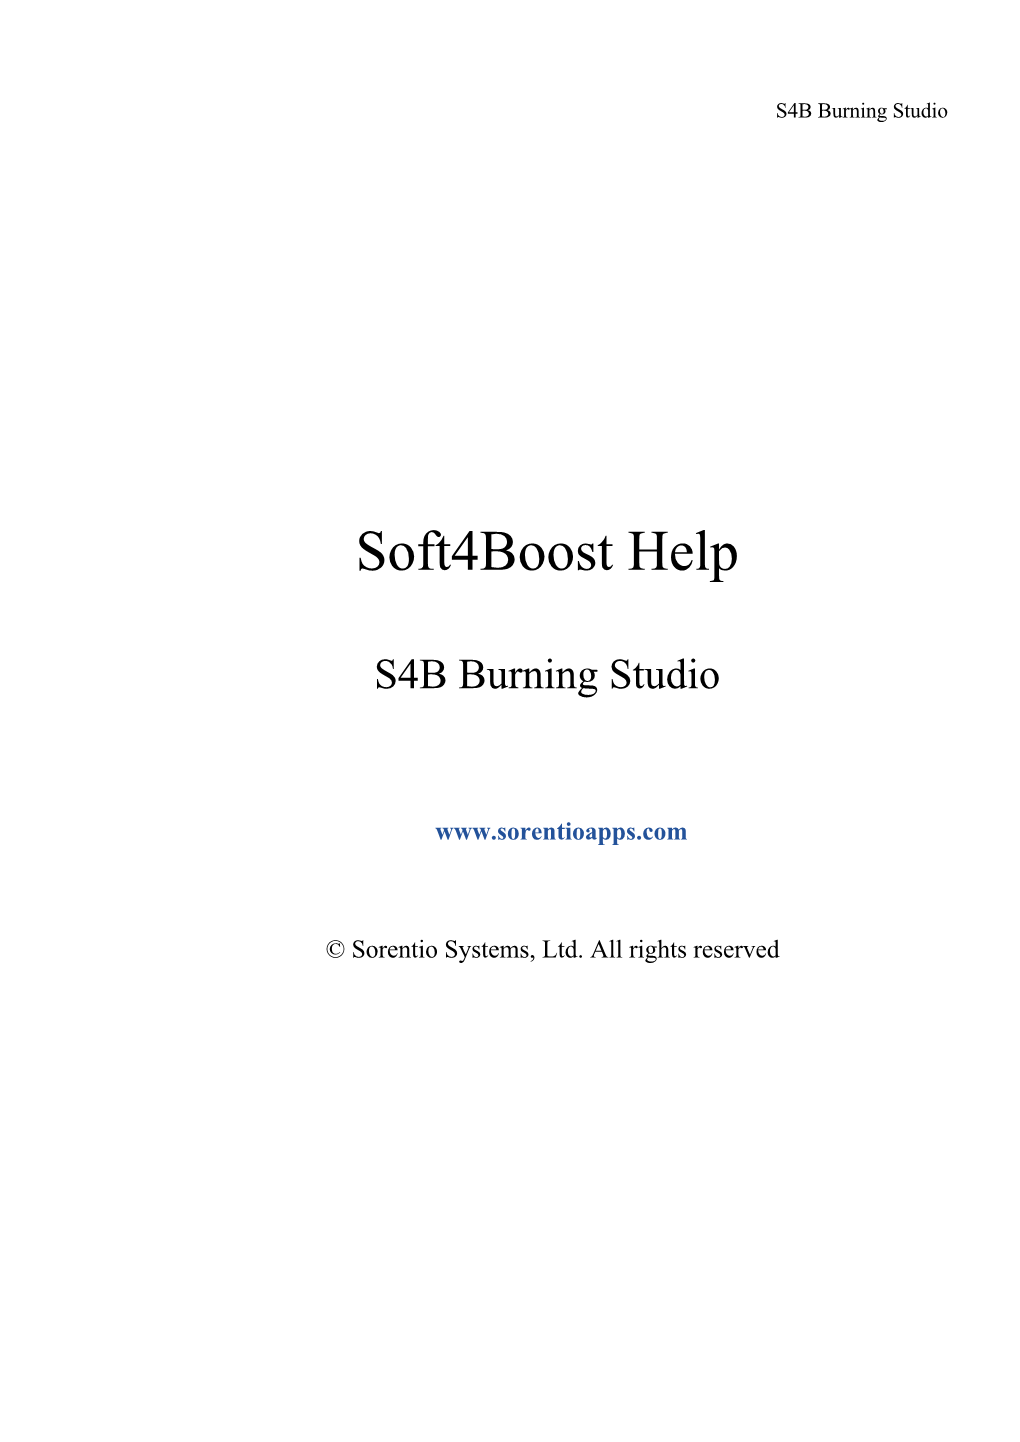 Soft4boost Burning Studio Is a Compact and Fully Functional Application That Lets You Perform Different Burning Tasks with Any Kind of Files